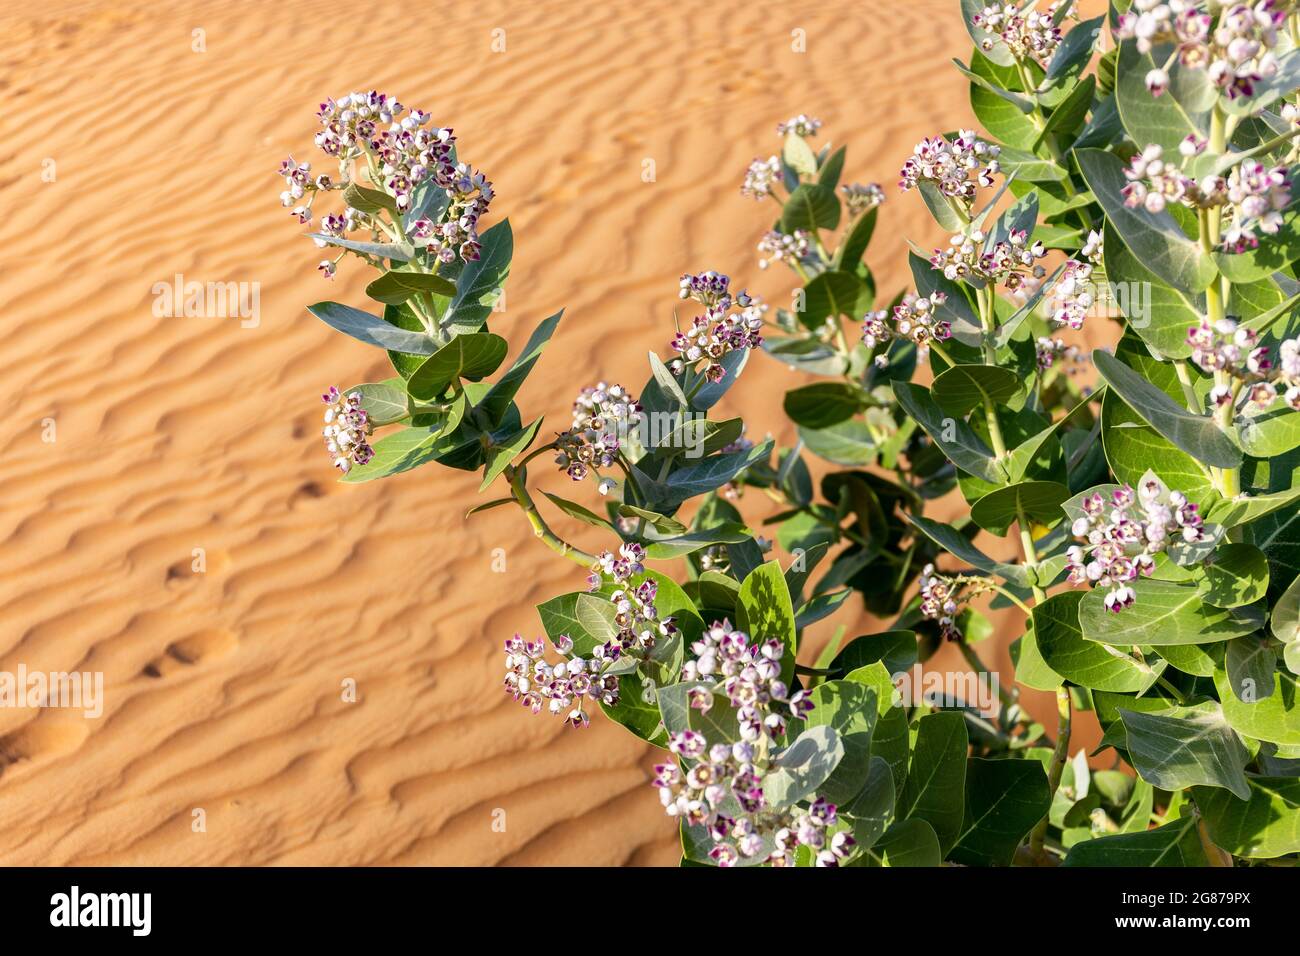 Apple of Sodom (Calotropis procera) plant with purple flowers blooming and desert sand dunes texture in the background, United Arab Emirates. Stock Photo